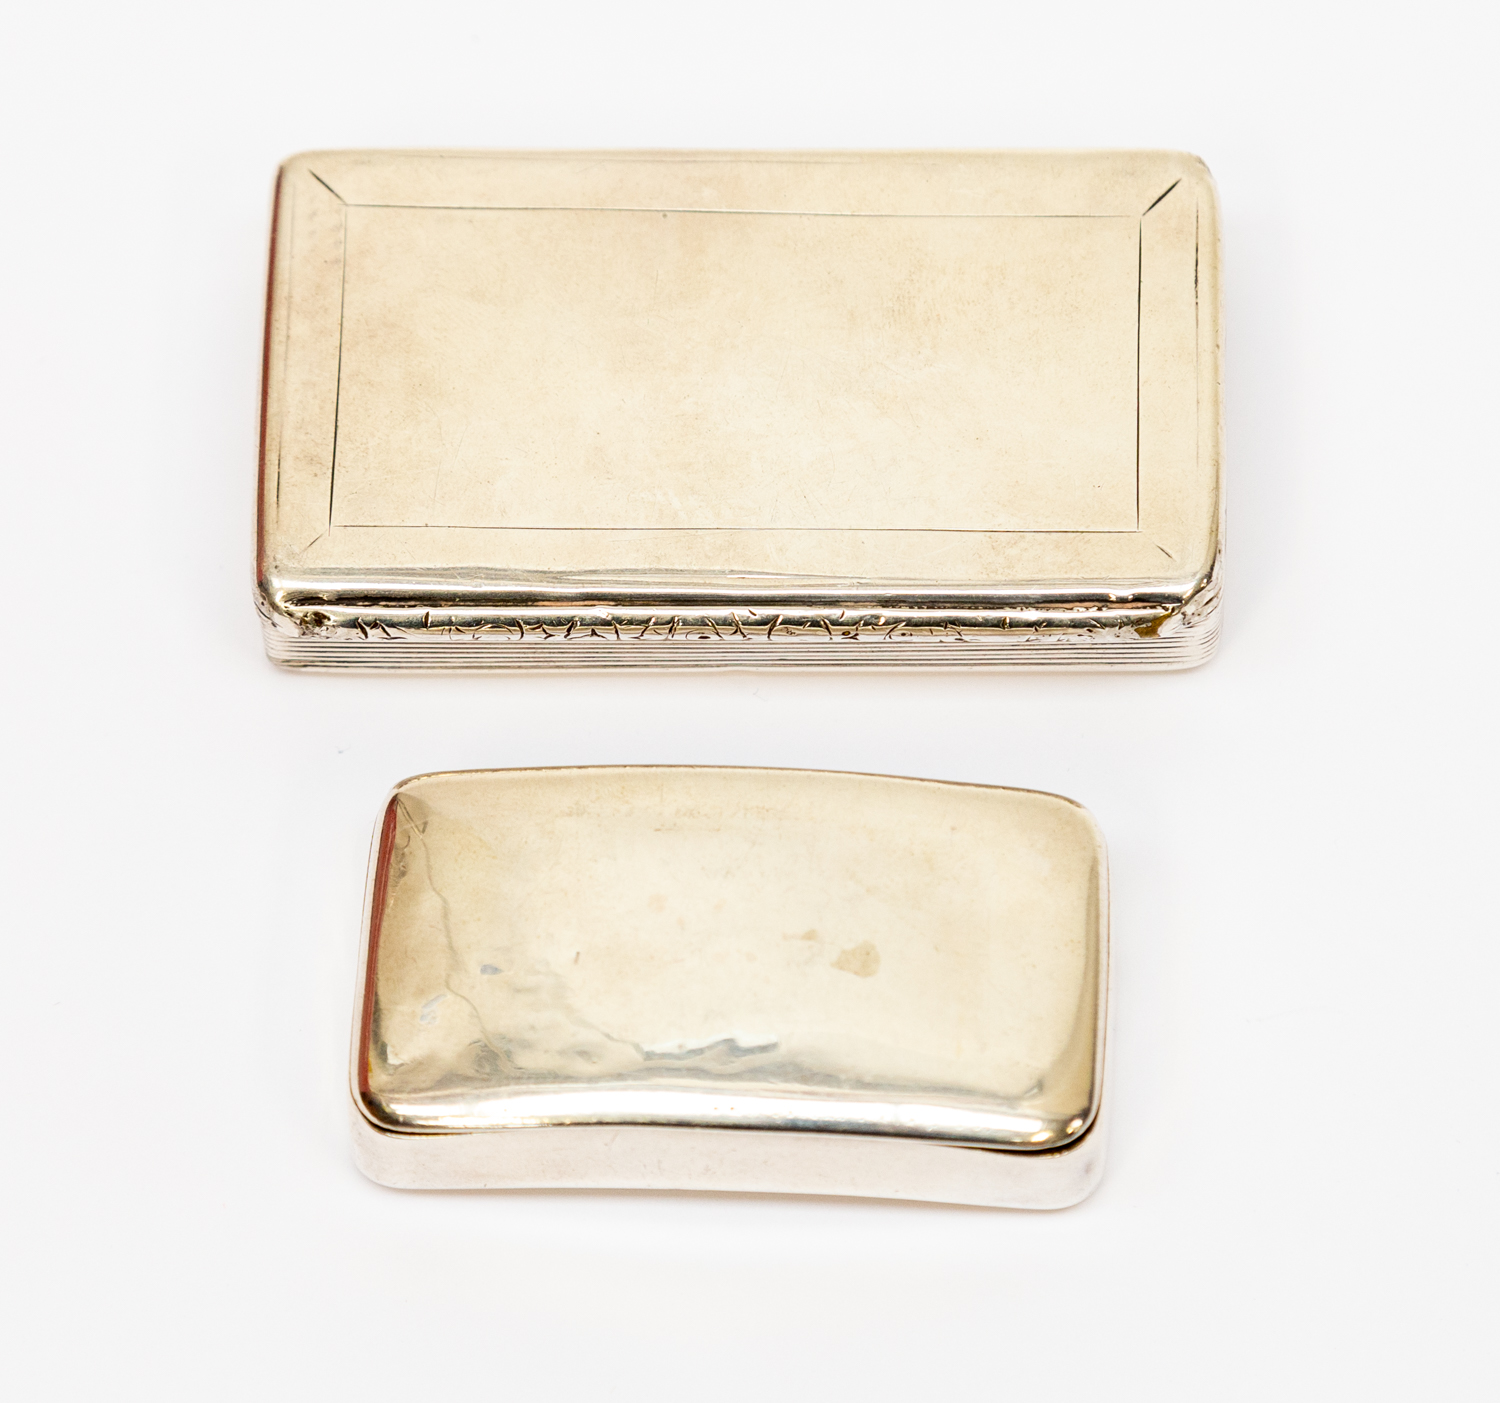 A William IV silver snuff box, reeded sides with plain lid, gilt interior, William Simpson,